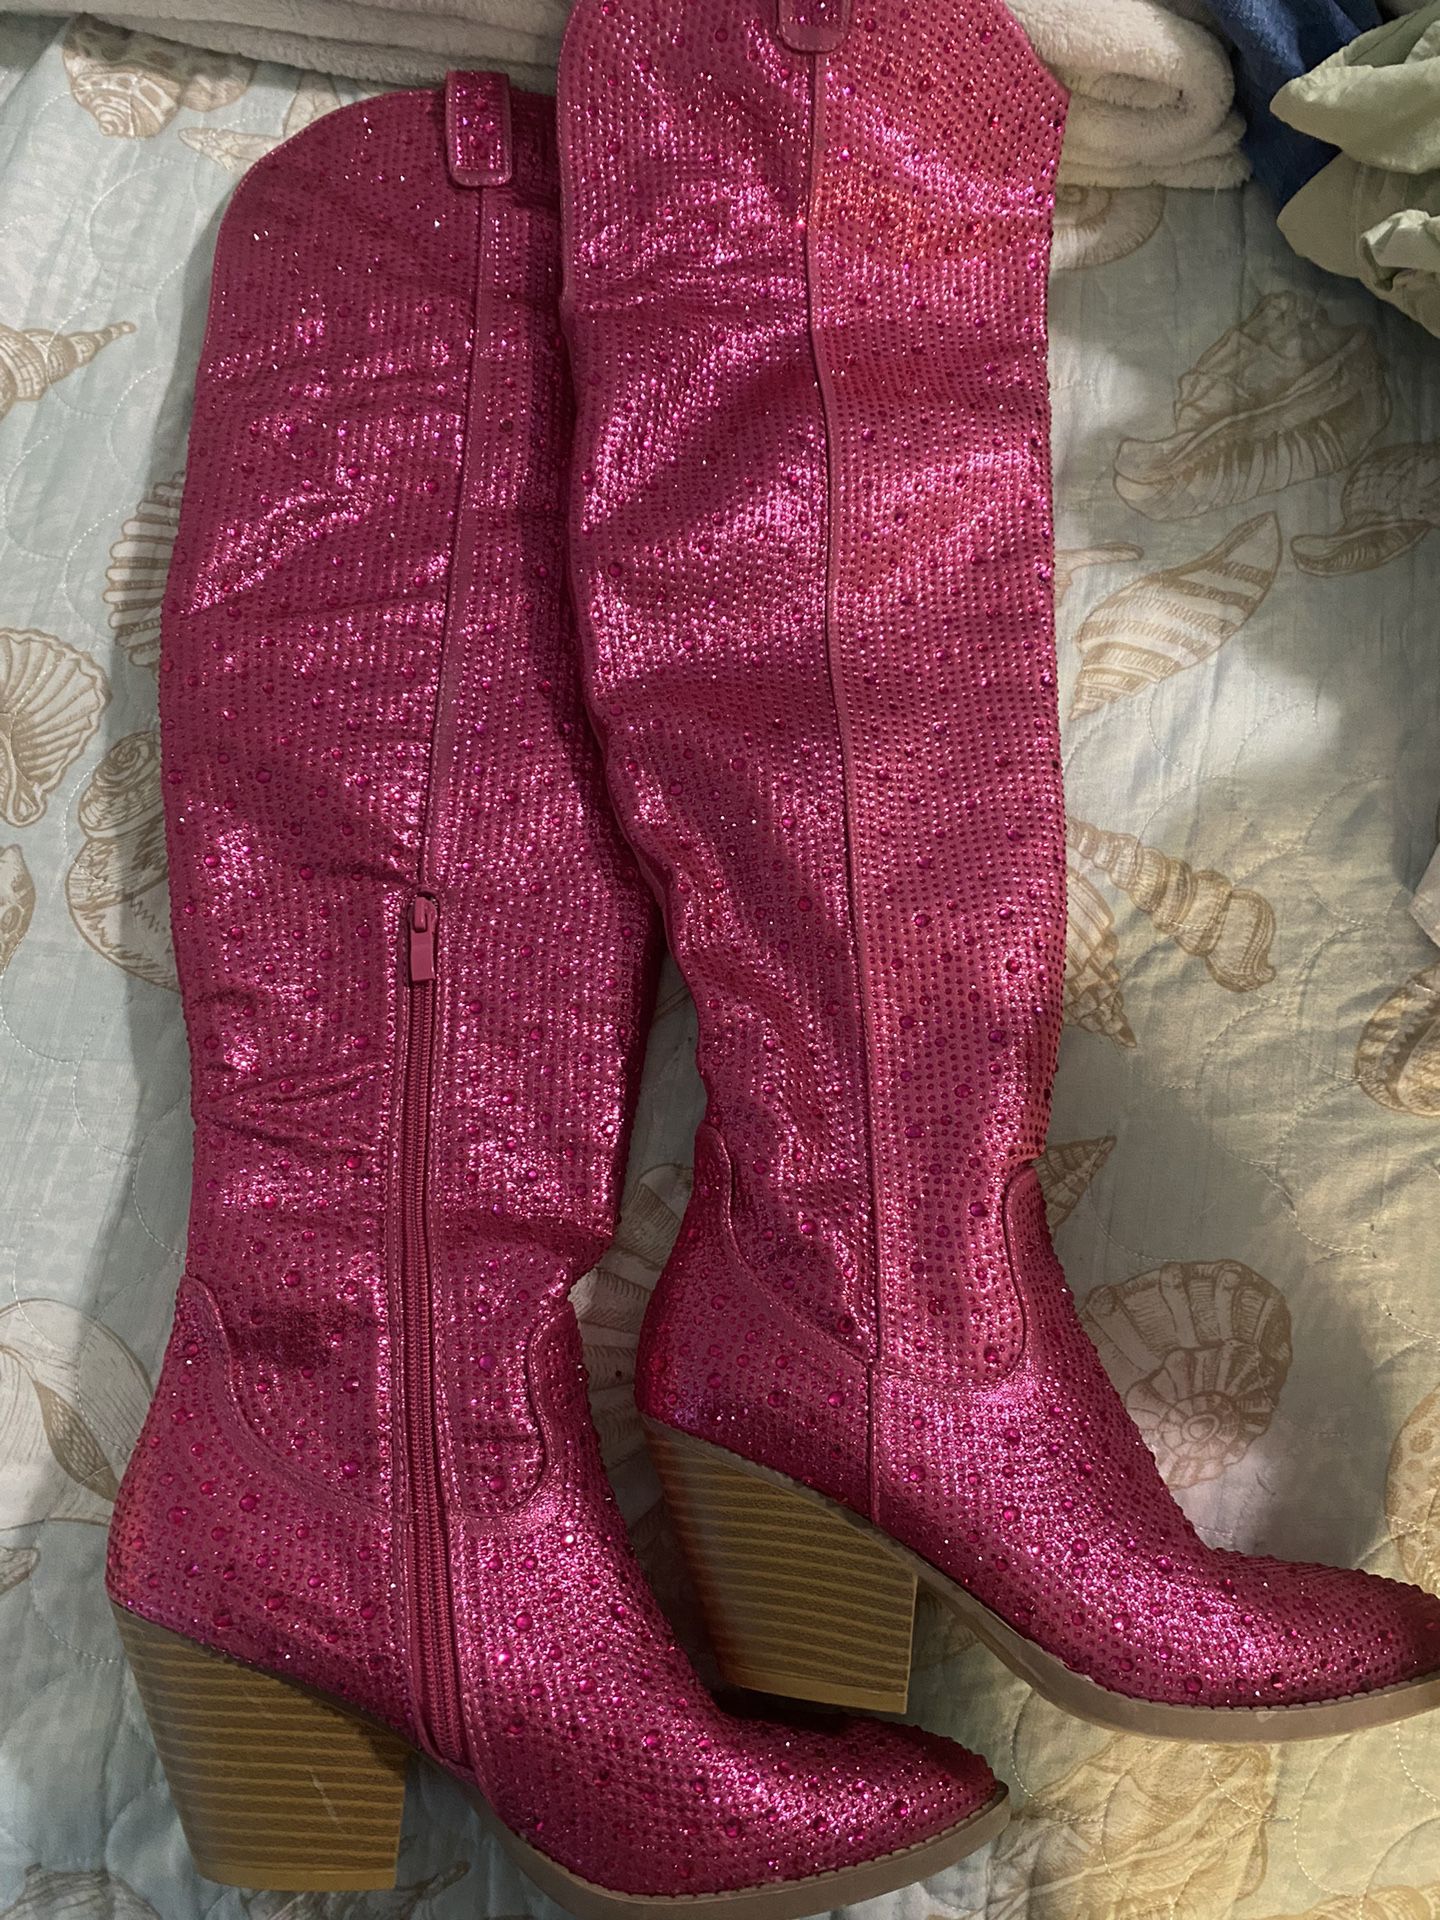 Hot Pink Sparkly Boots